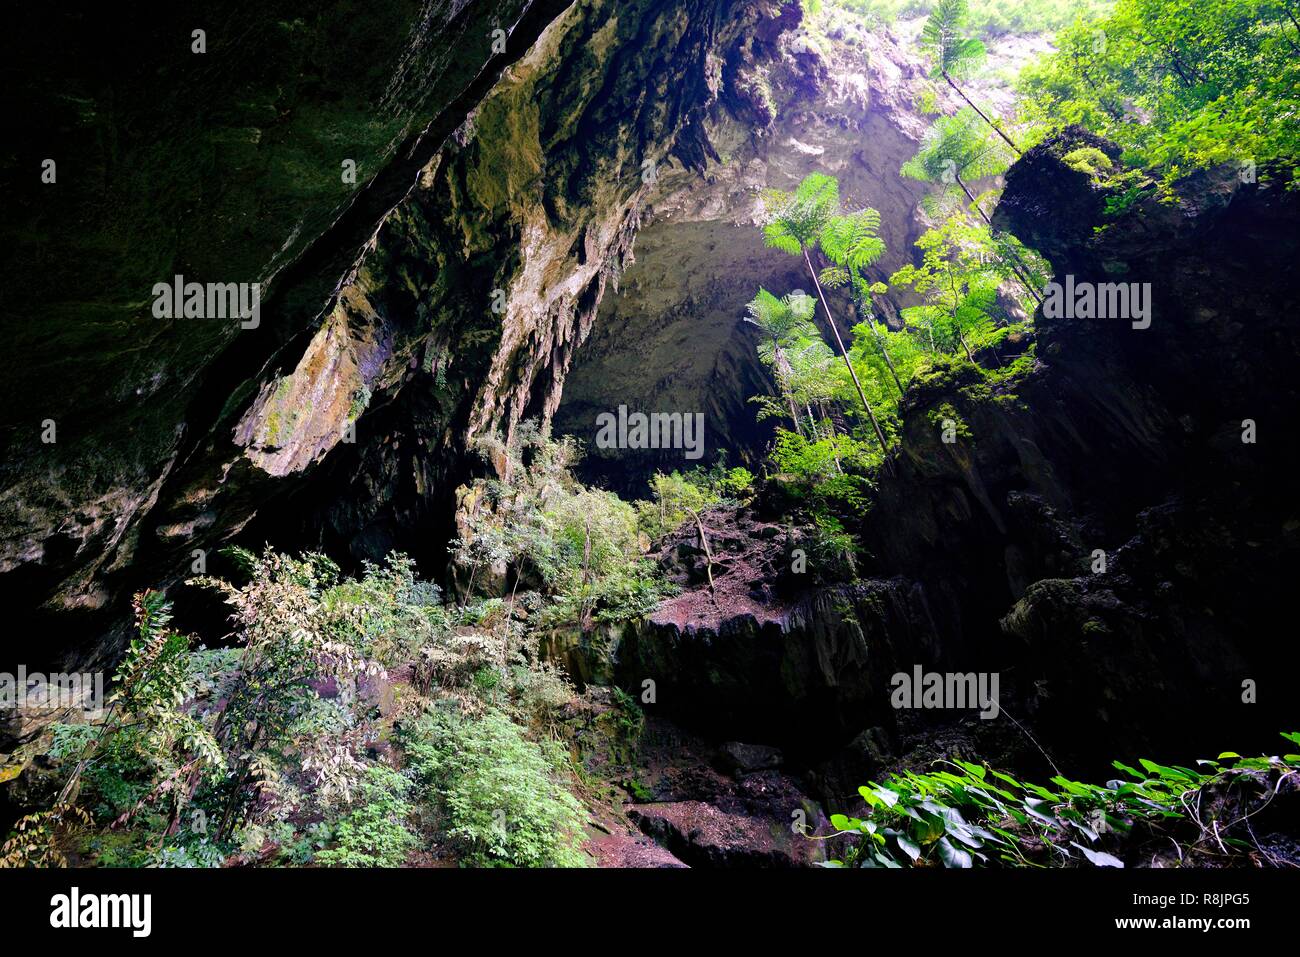 Malaysia, Borneo, Sarawak, Gunung Mulu National Park listed as World Heritage by UNESCO, entrance to the Deer cave, one of the largest caves in the world Stock Photo